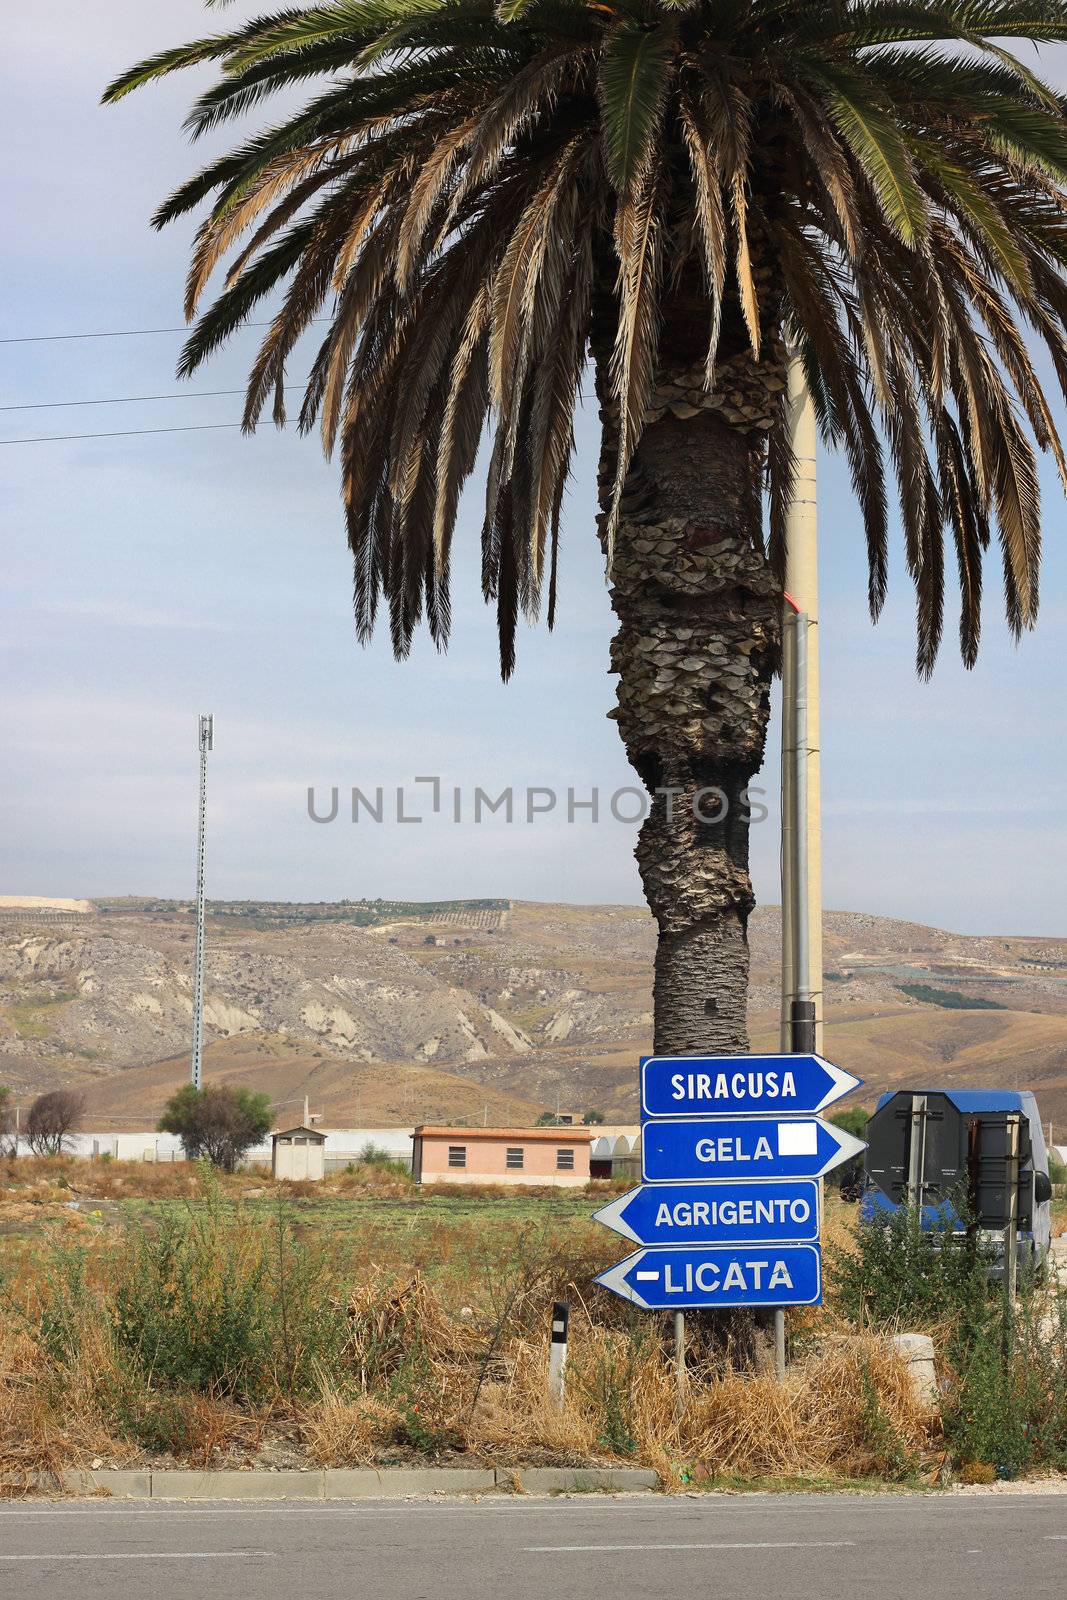 Roadsigns in Sicily, showing directions where to drive